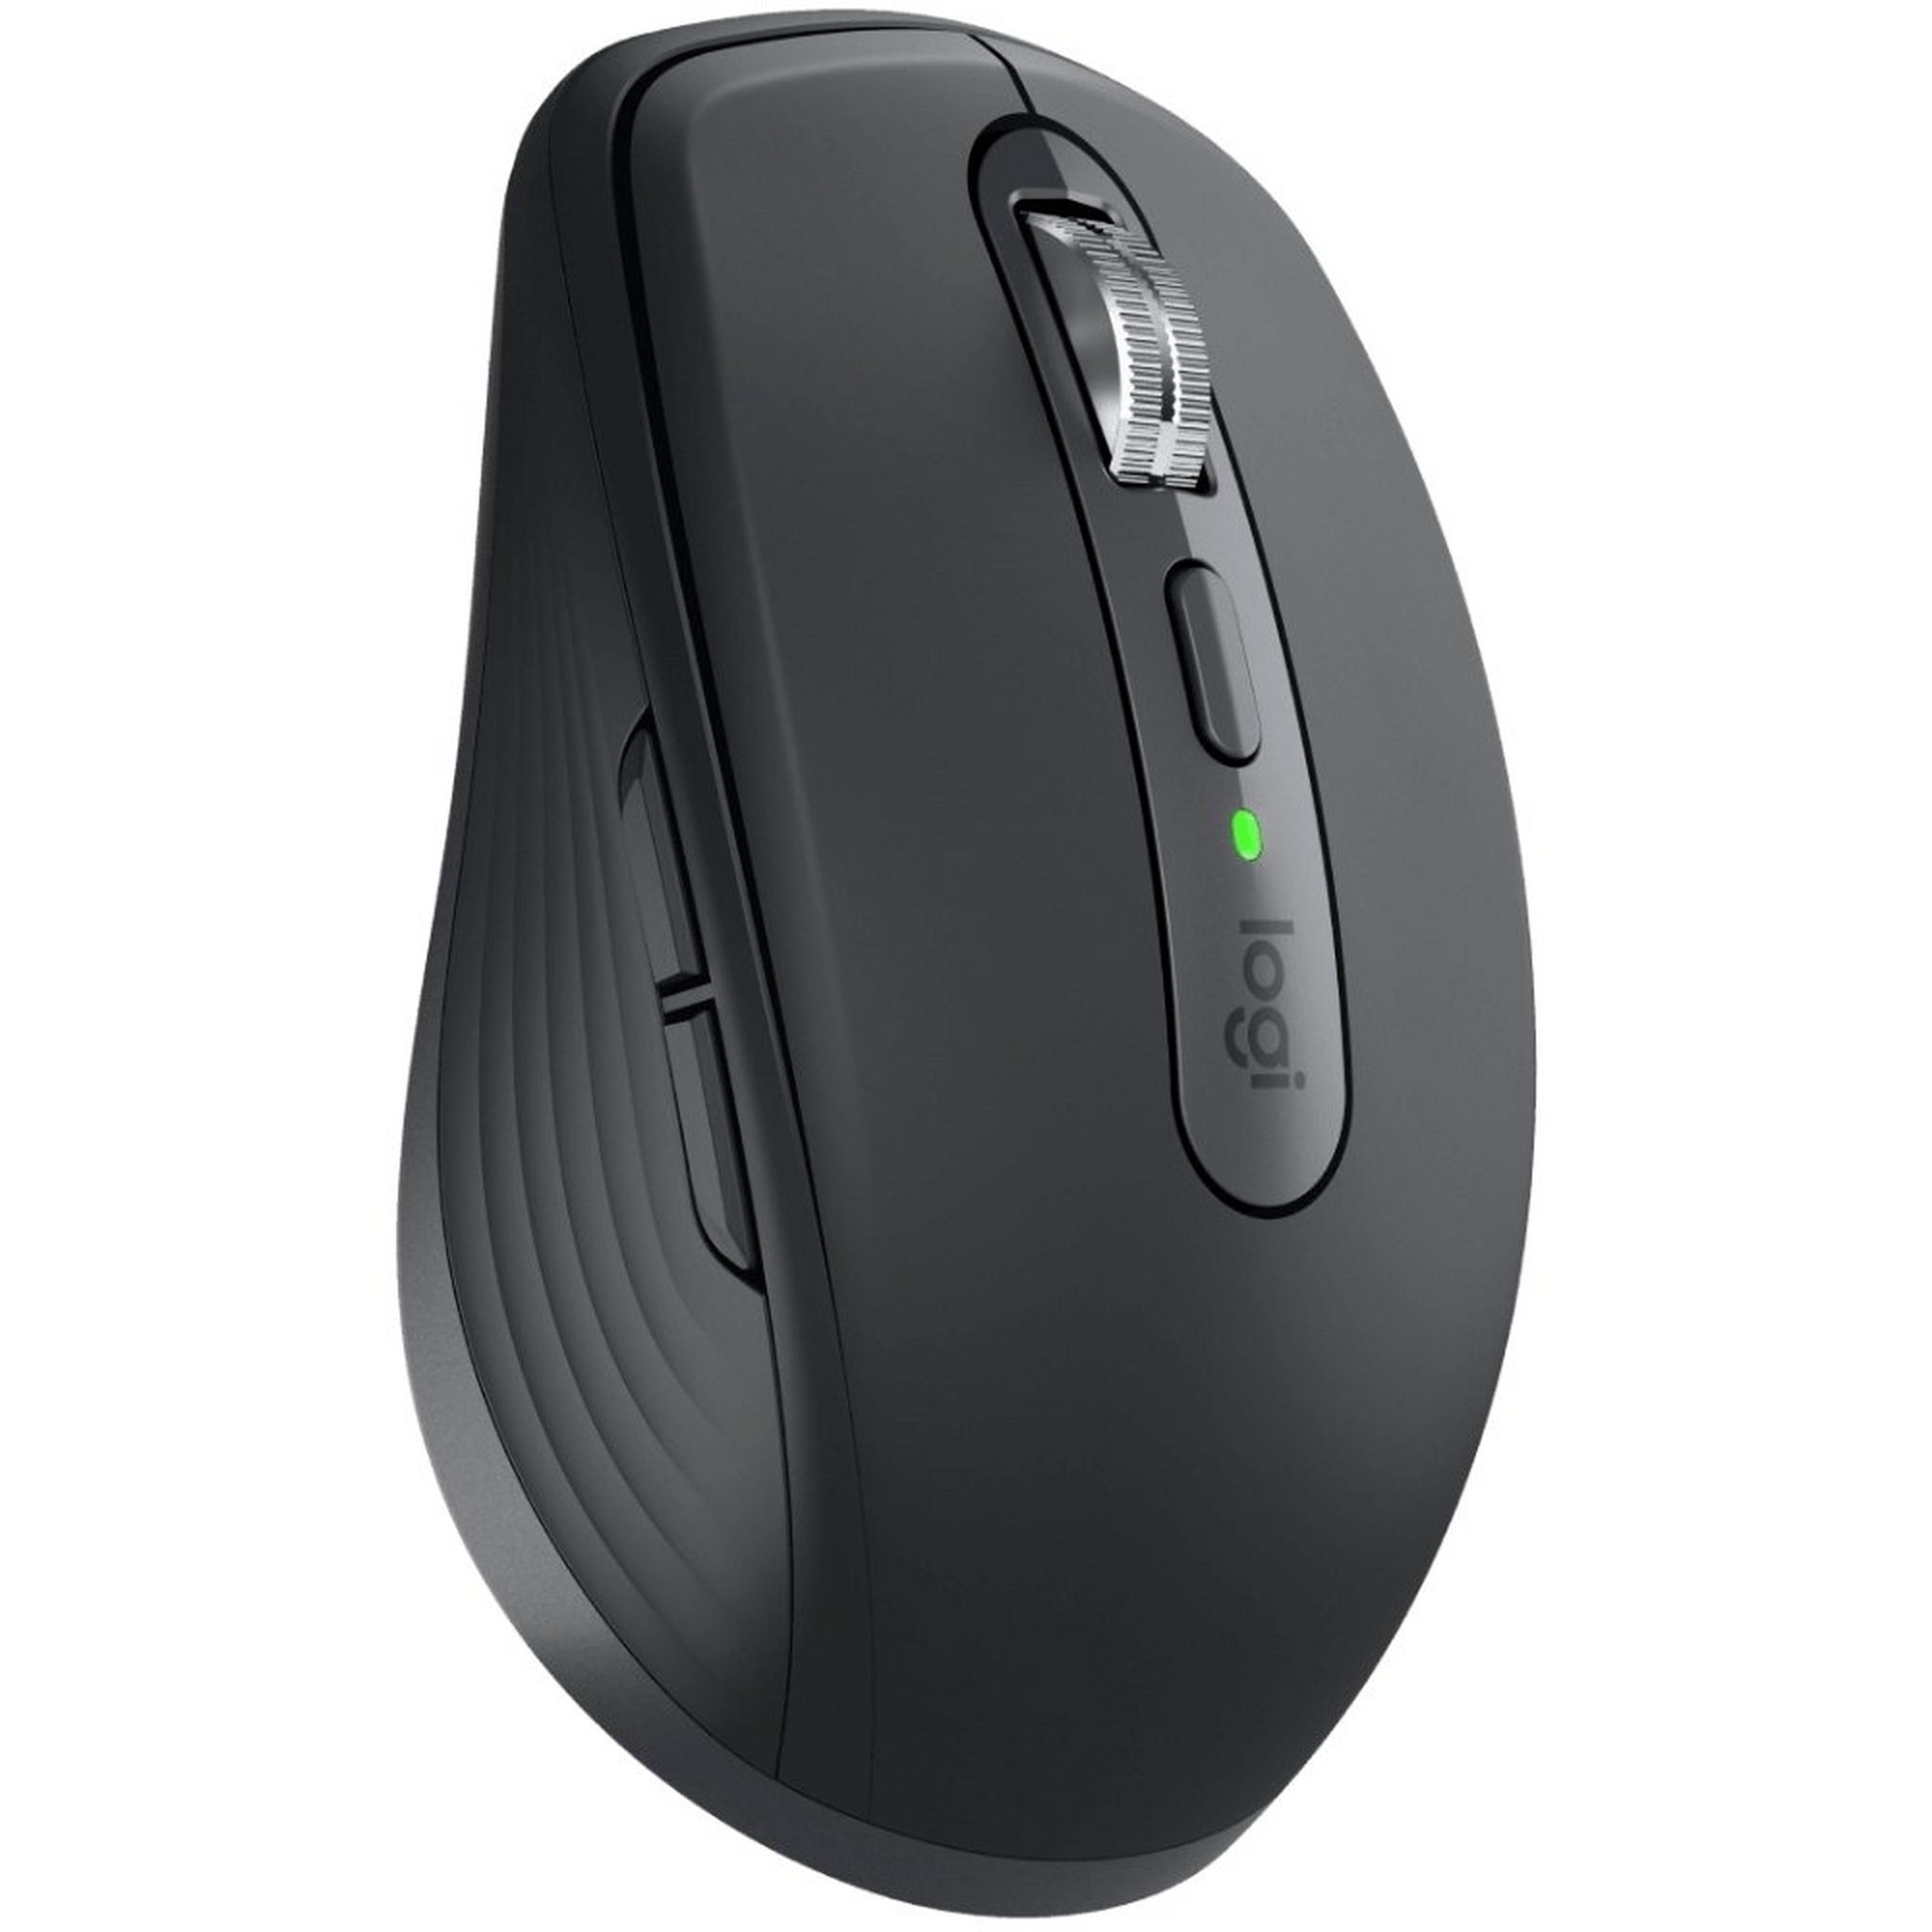 Logitech MX Anywhere 3S Wireless Mouse, 910-006929 – Graphite